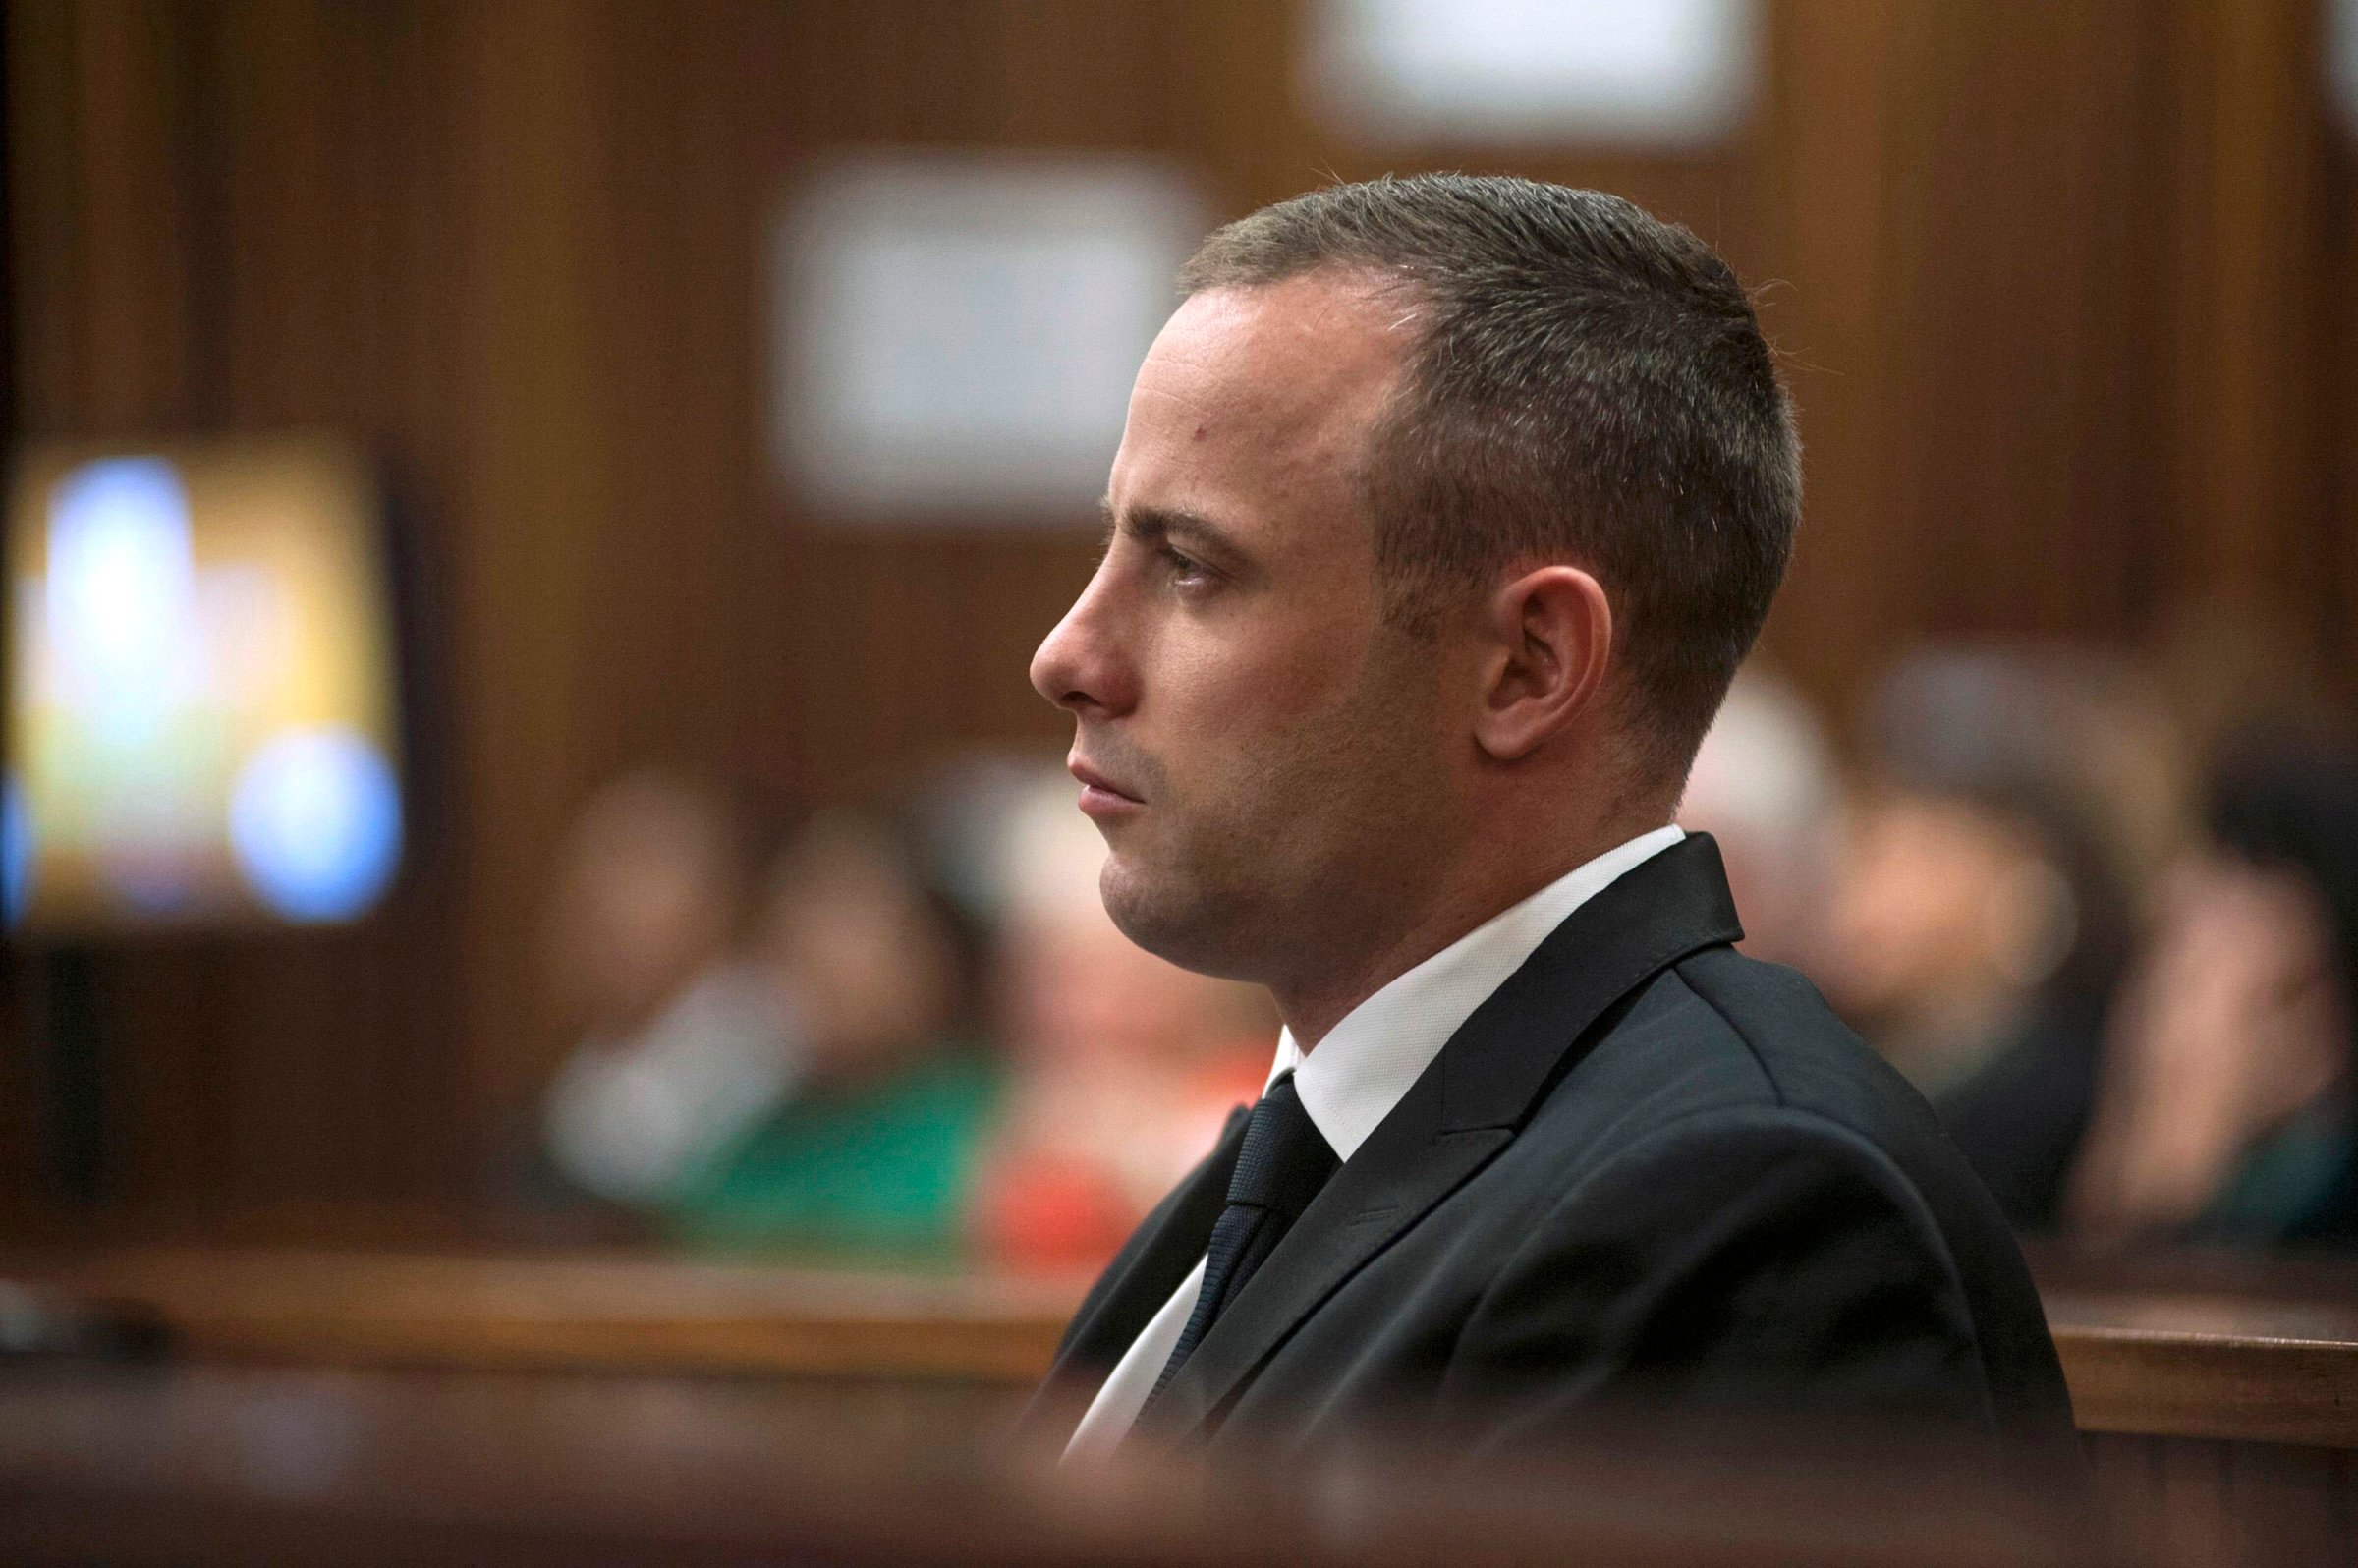 Olympic and Paralympic track star Oscar Pistorius sits in the dock in the North Gauteng High Court in Pretoria May 5, 2014.